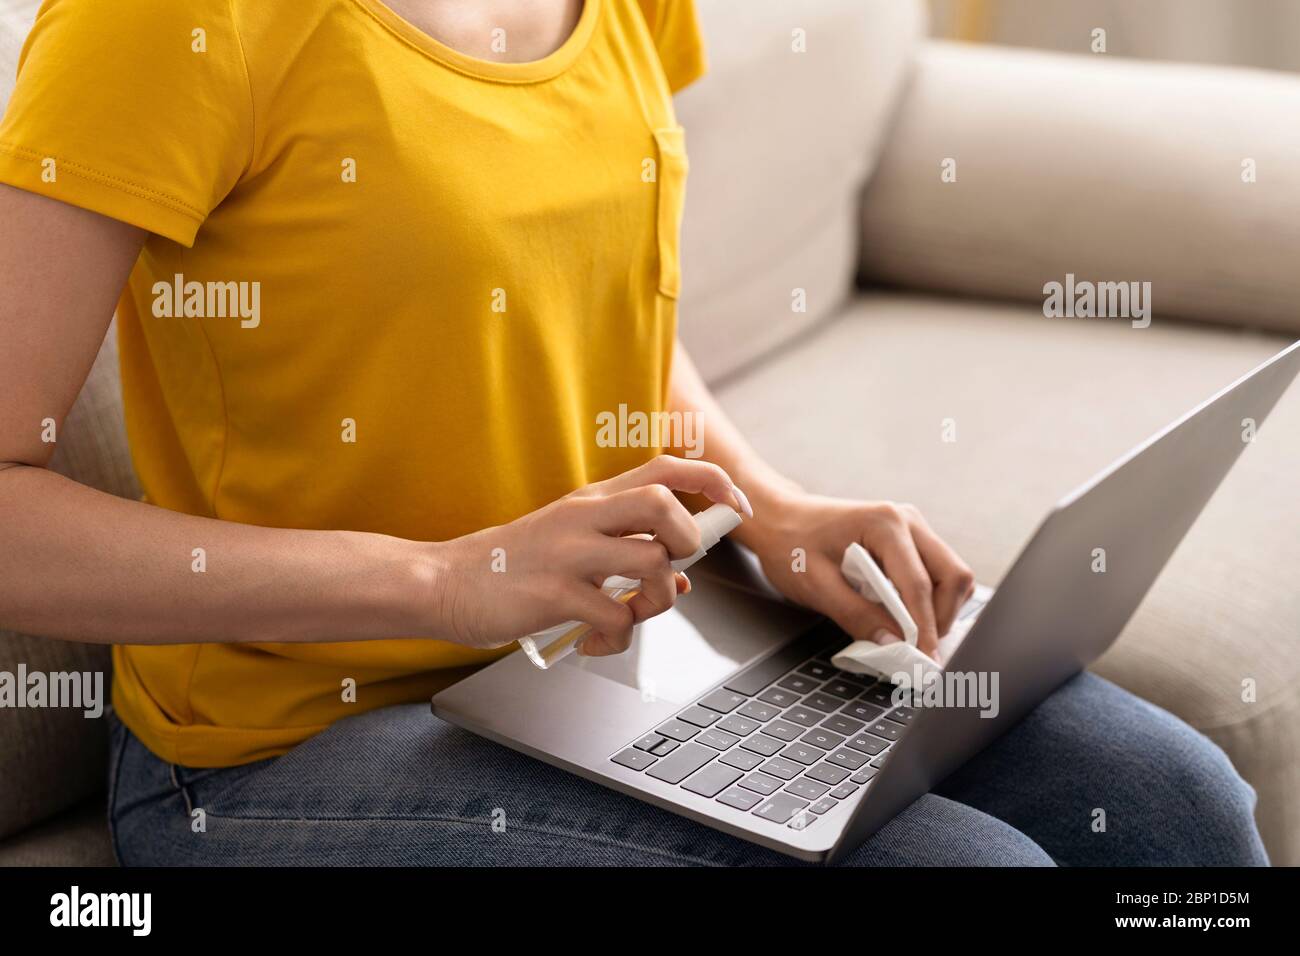 Hygiene against infection. Unrecognizable girl using sanitizer to clean laptop at home, close up Stock Photo